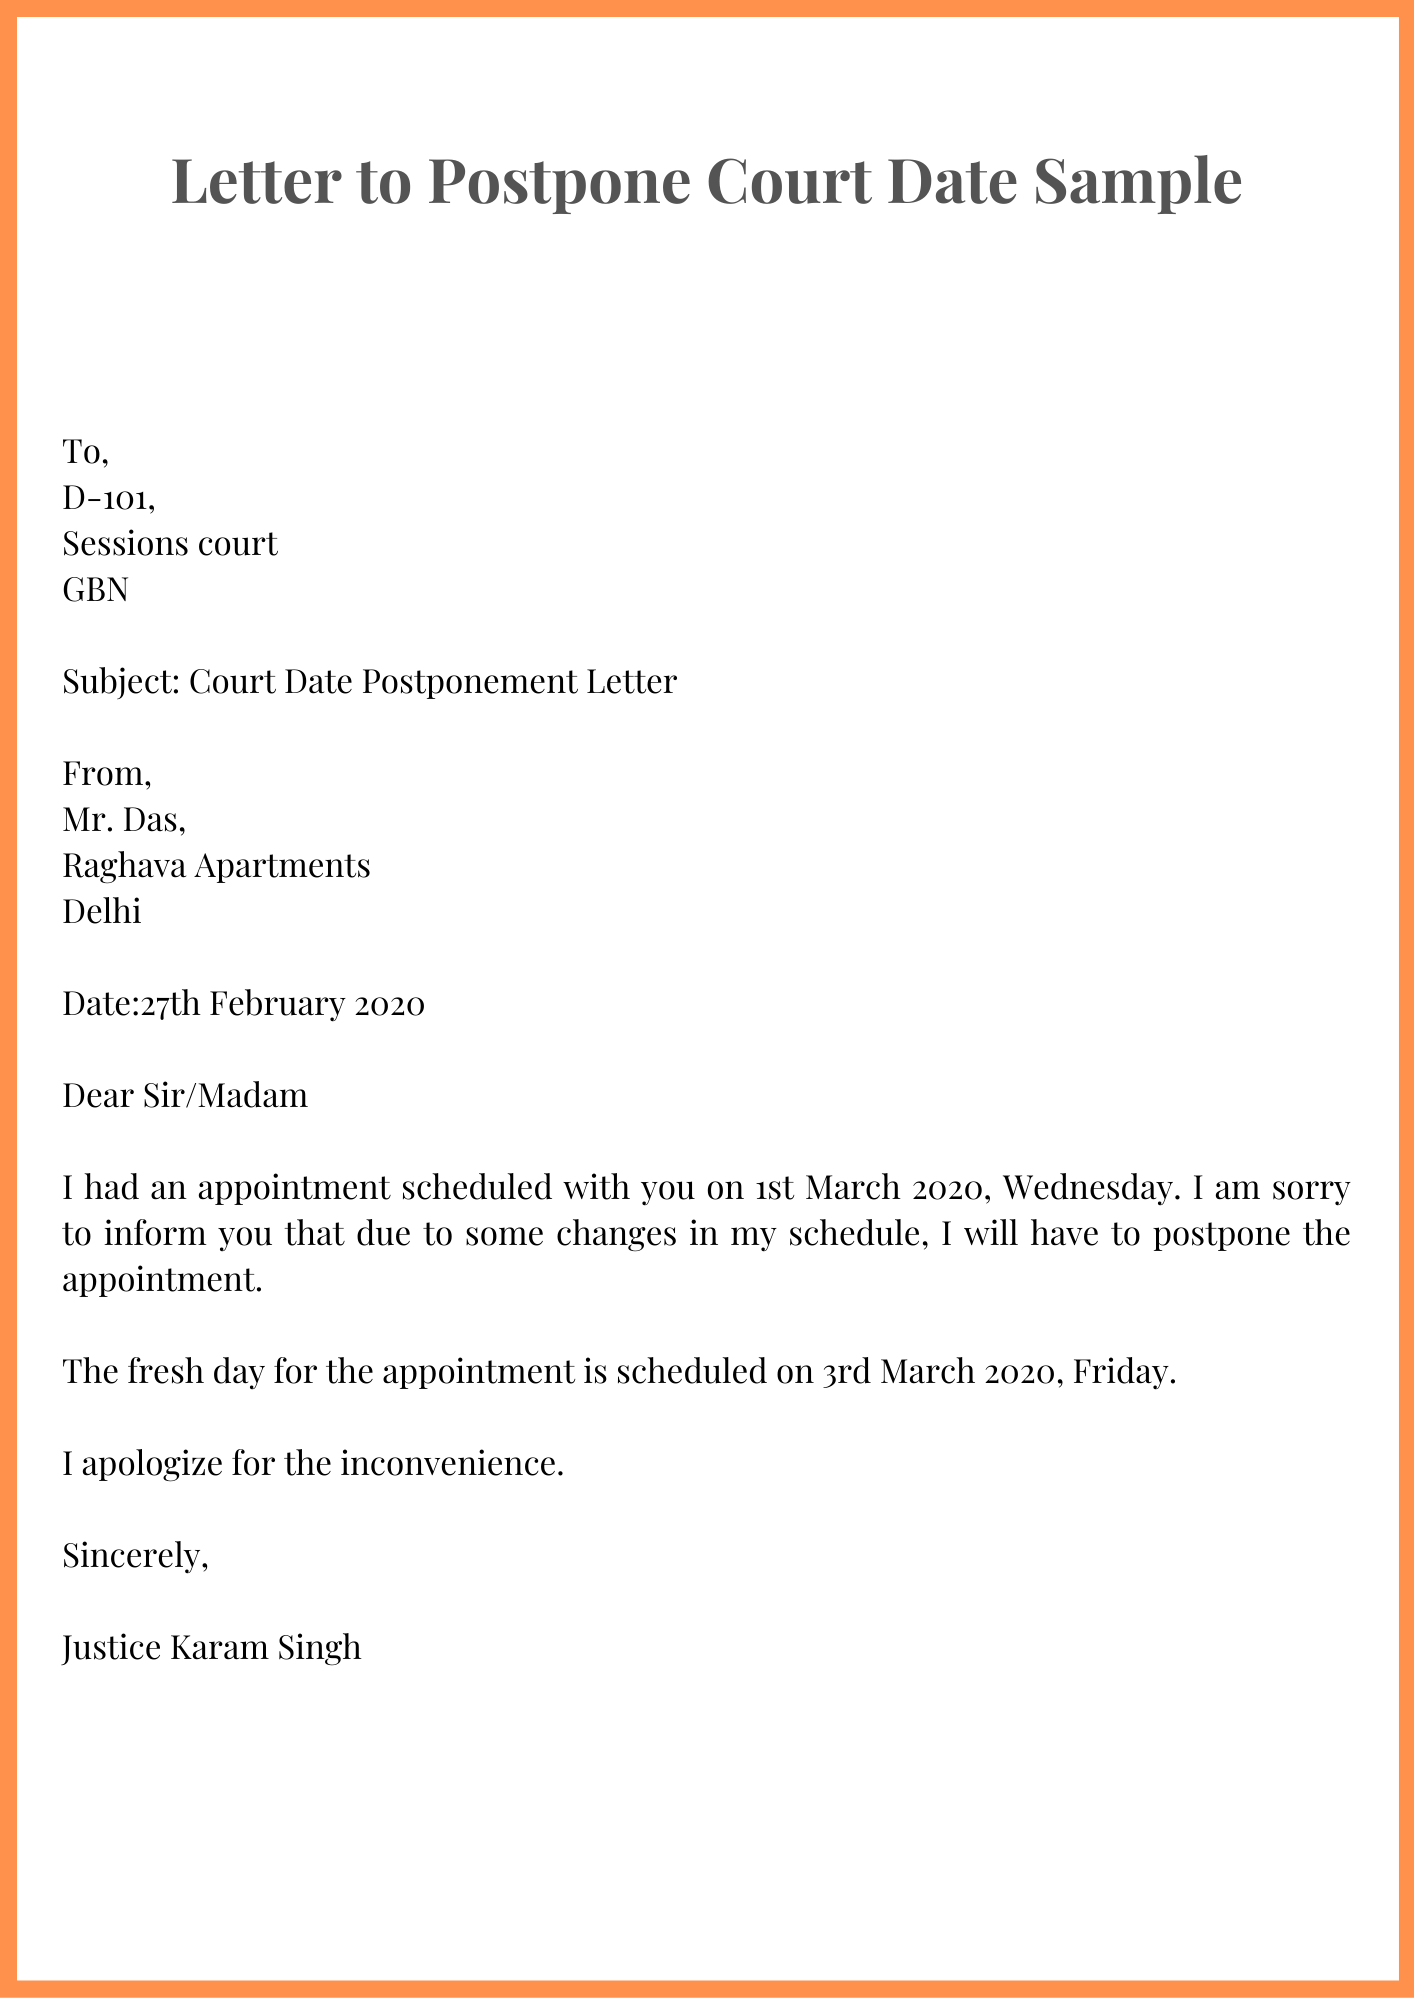 Sample Letter To The Court from bestlettertemplate.com